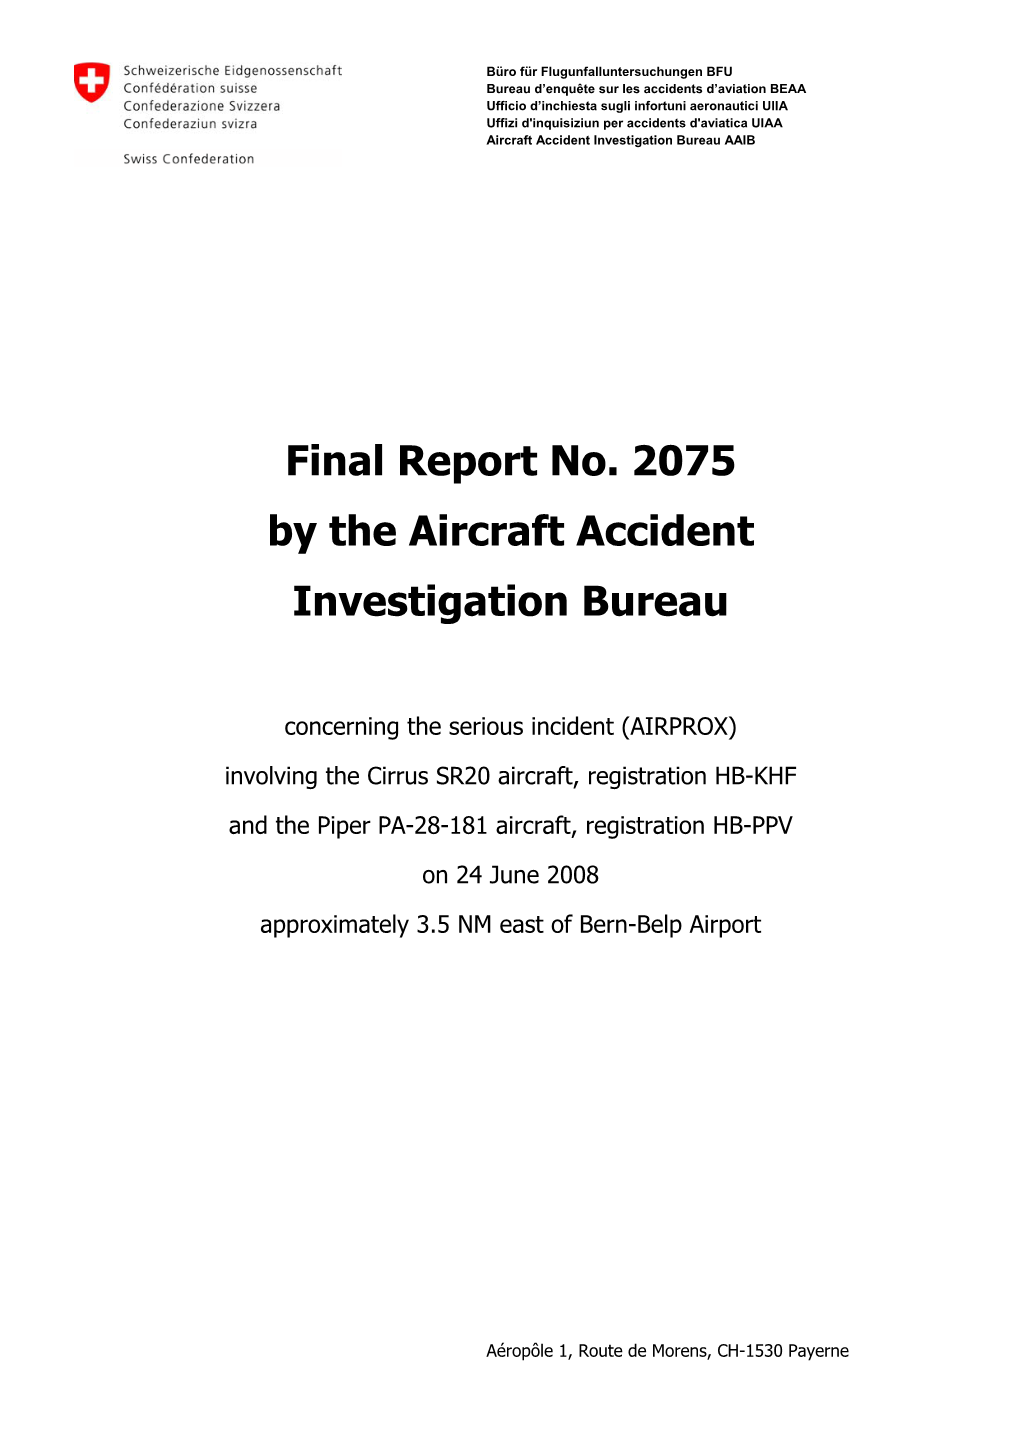 Final Report No. 2075 by the Aircraft Accident Investigation Bureau